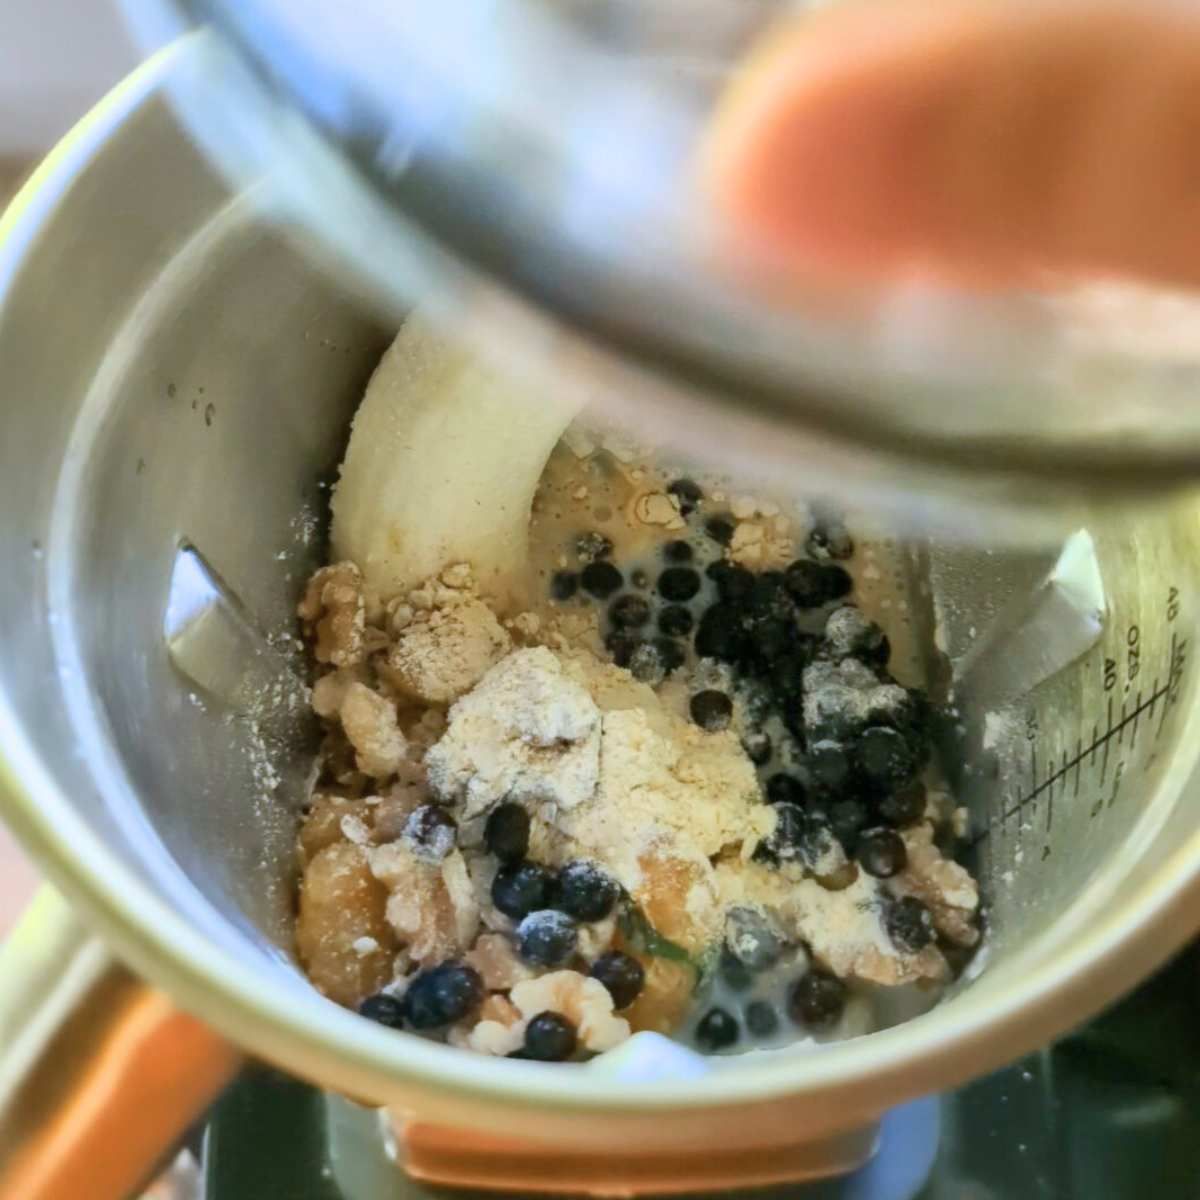 a hand putting a lid on a blender full of banana, oatmeal, blueberries, walnuts, and protein powder.